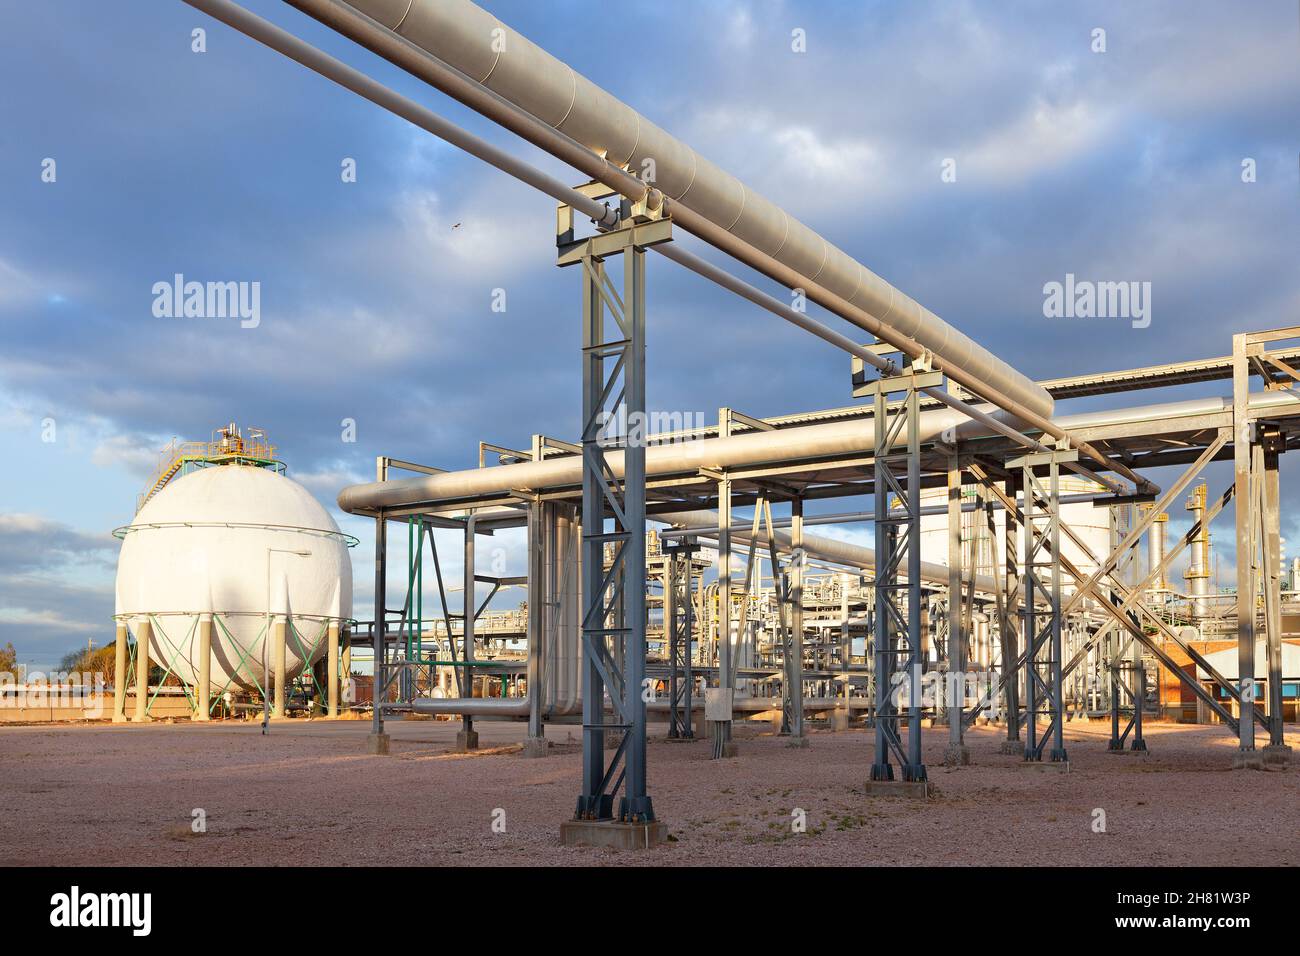 View of a gas refinery plant. Stock Photo